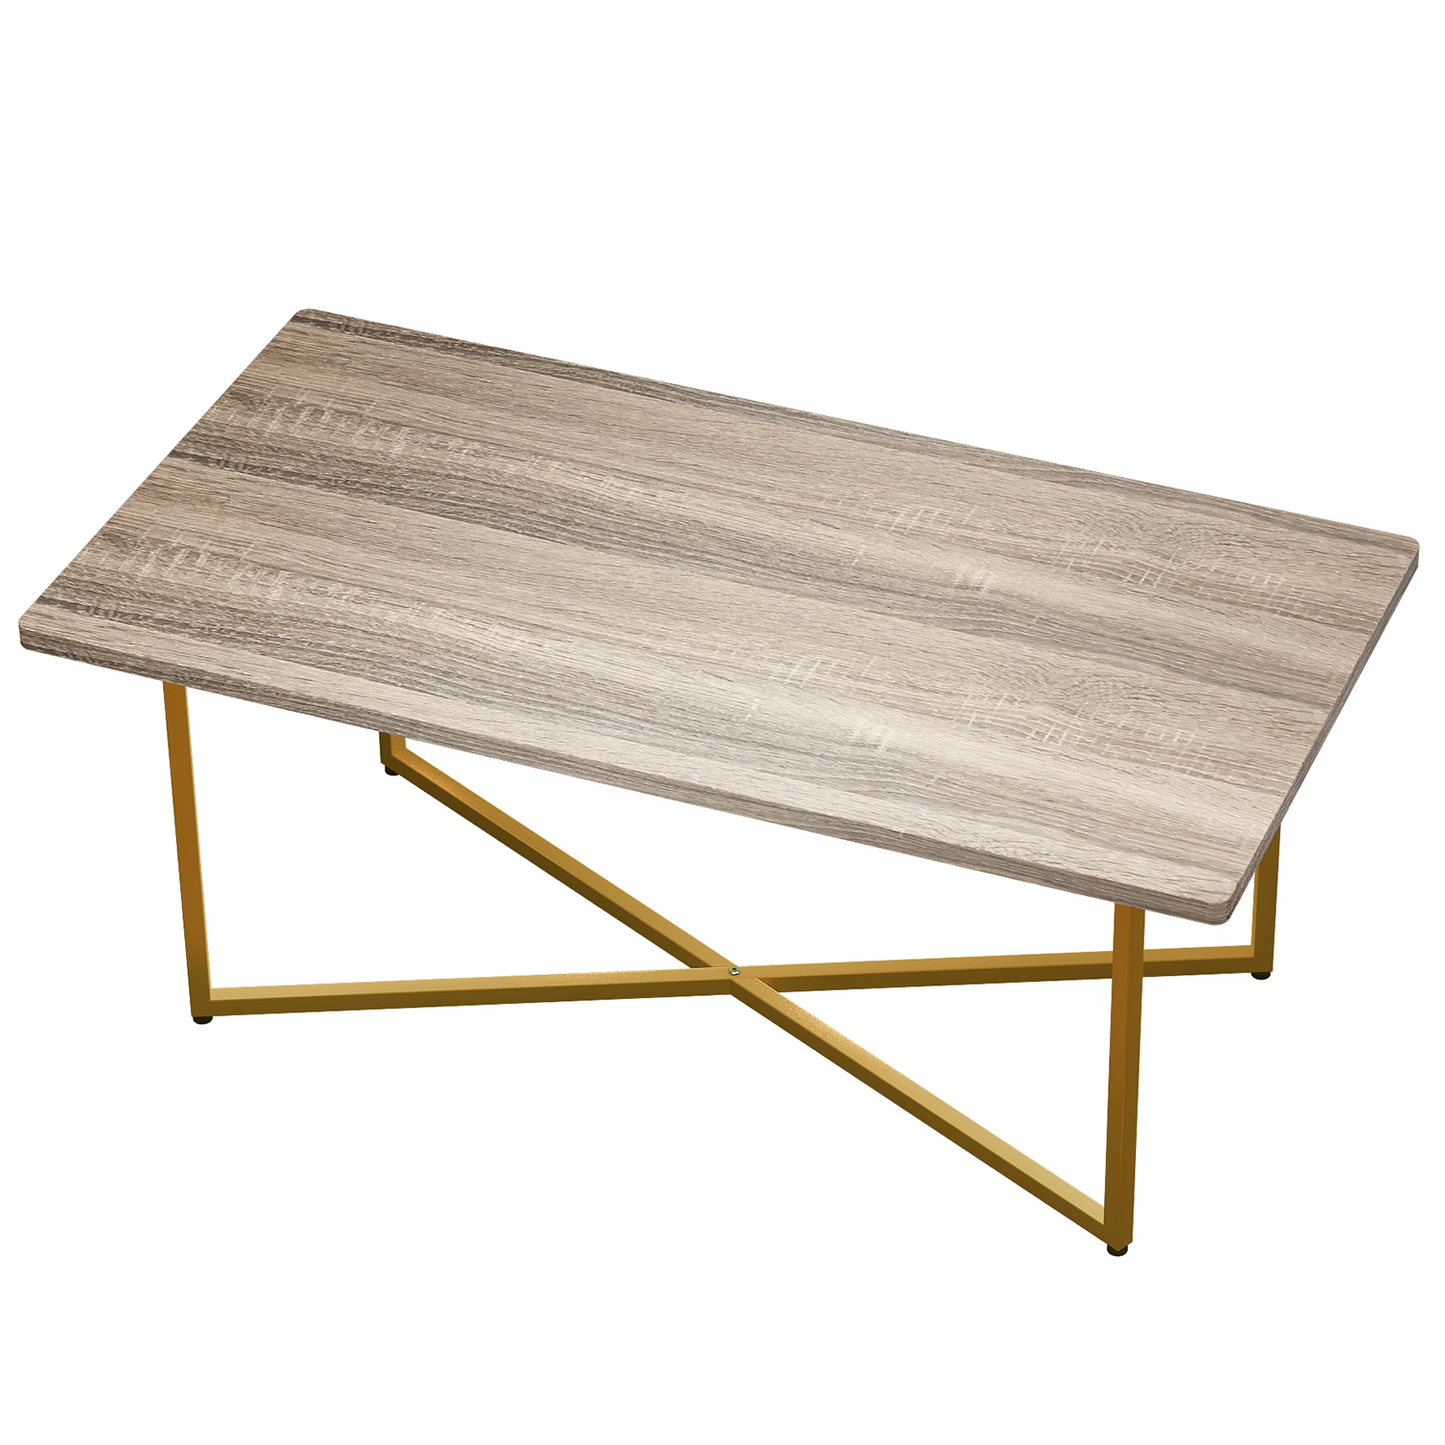 SYNGAR Industrial Coffee Table for Living Room, Wood Coffee Table Rectangle with Sturdy Gold Metal Frame and Wood Finish, Fits for Simple Rustic and Modern Style, Easy Assembly